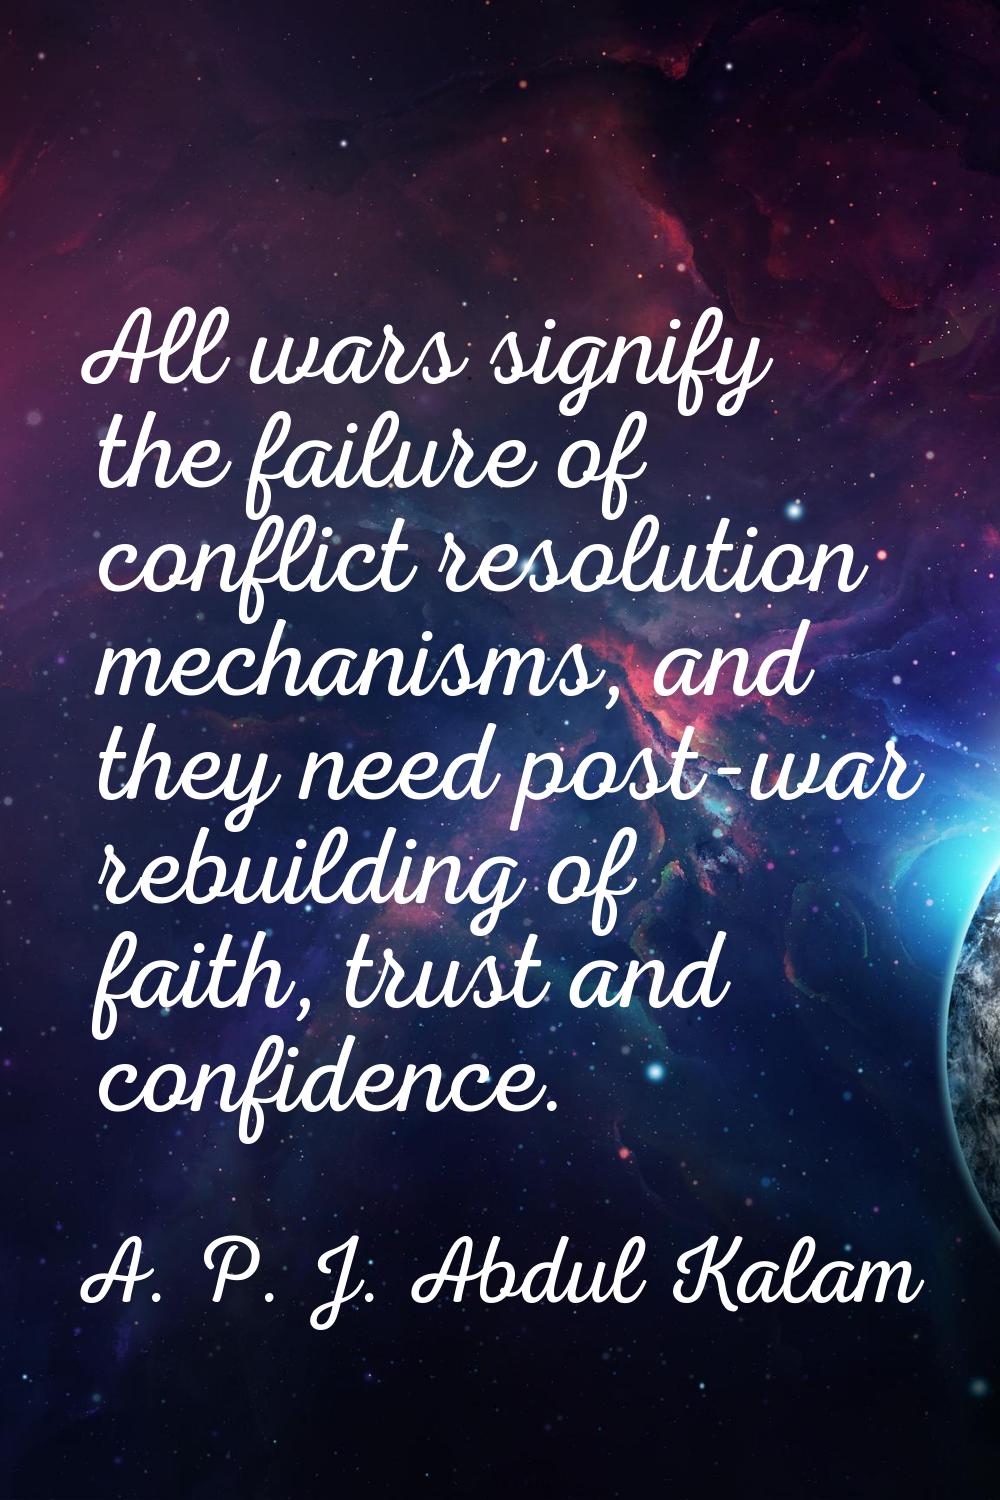 All wars signify the failure of conflict resolution mechanisms, and they need post-war rebuilding o